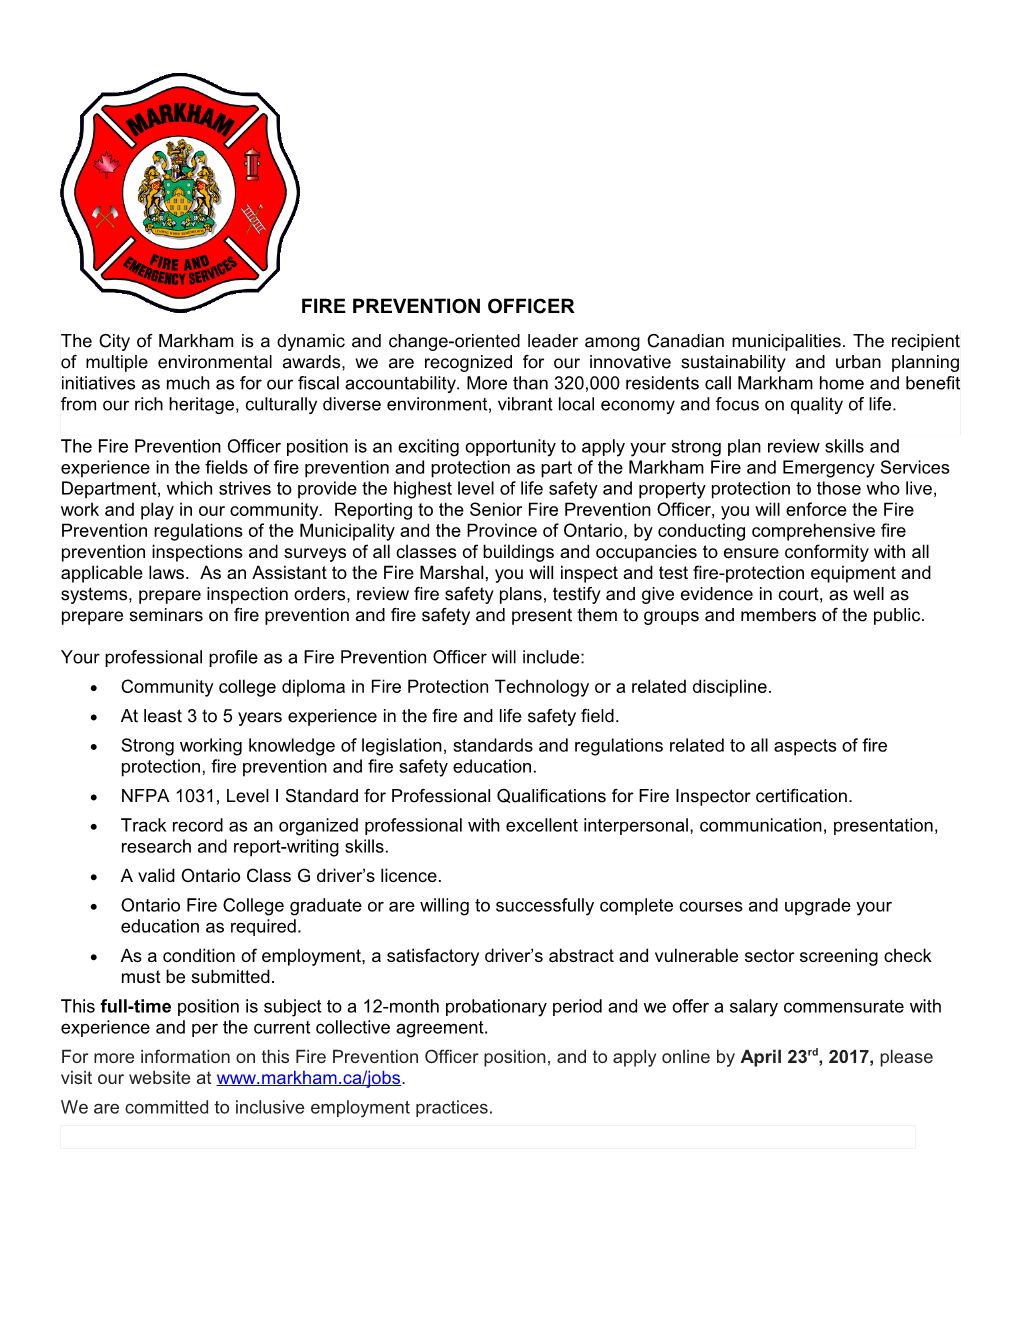 Your Professional Profile As a Fire Prevention Officer Will Include